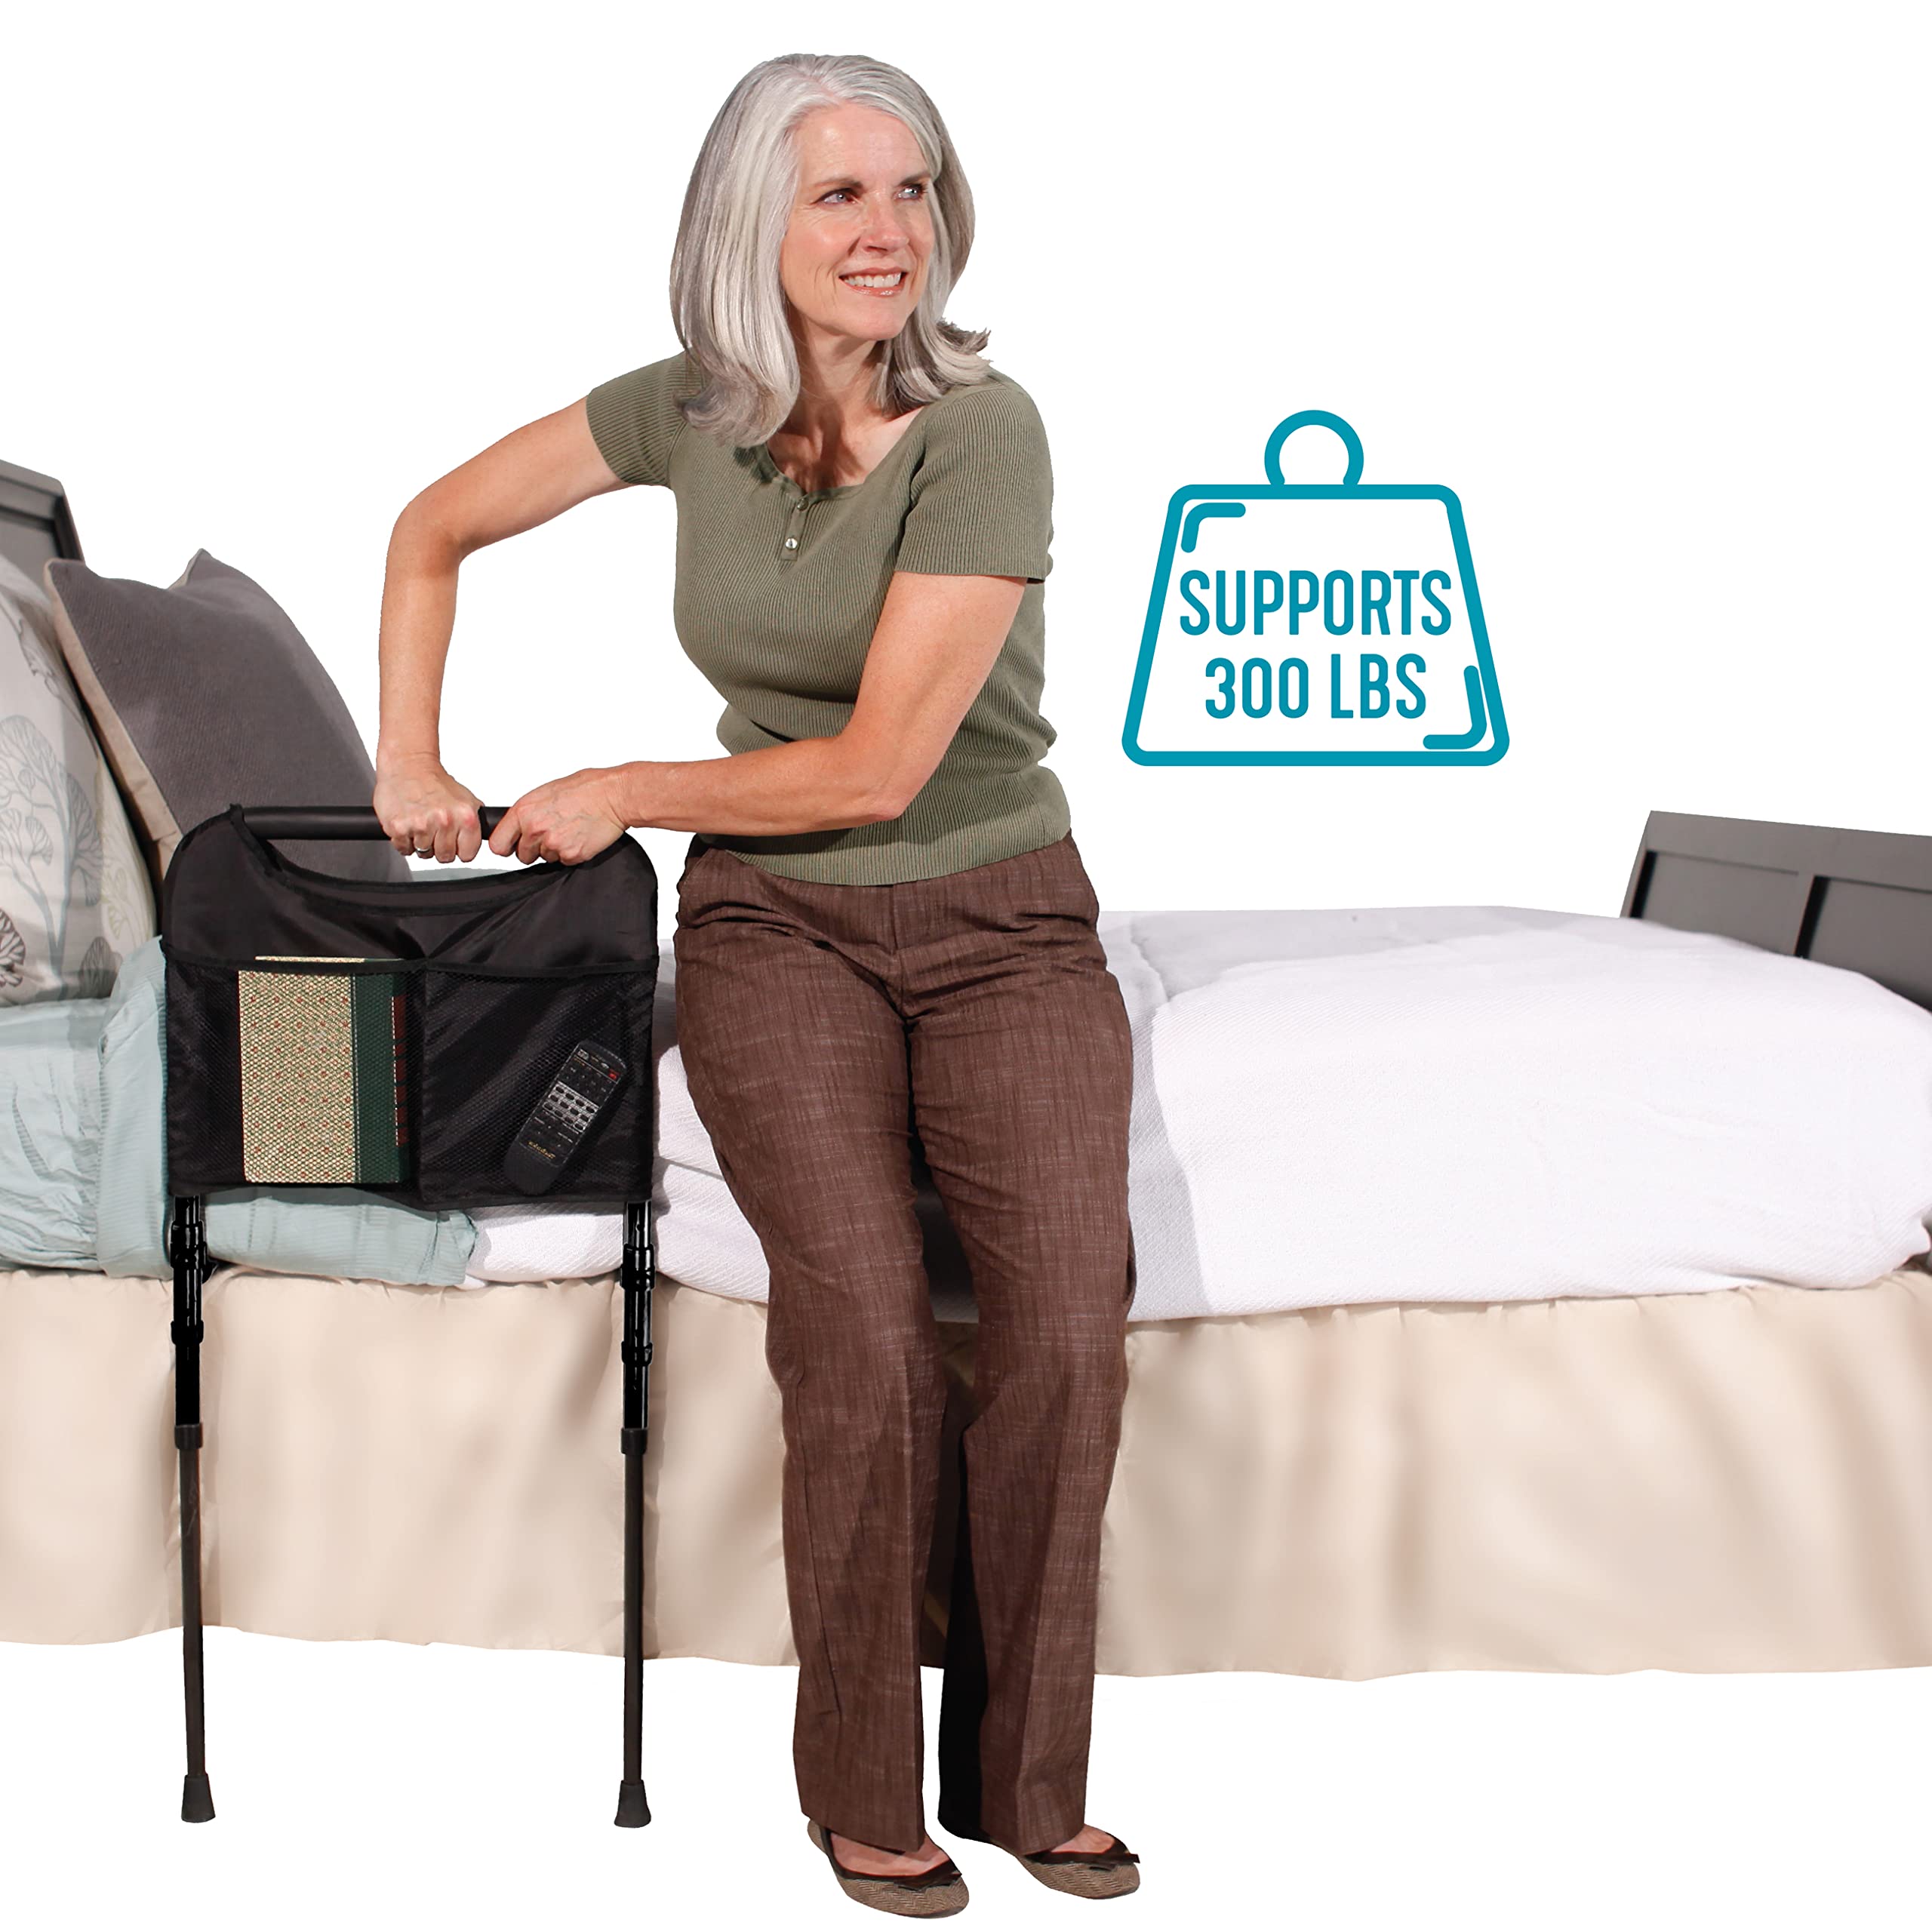 Able Life Sturdy Bed Rail, Adjustable Stand Assist Bed Bar with Support Legs for Fall Prevention, Bedside Rail Mobility Aid with Organizer Pouch for Adults, Seniors, and Elderly, Fits Most Beds